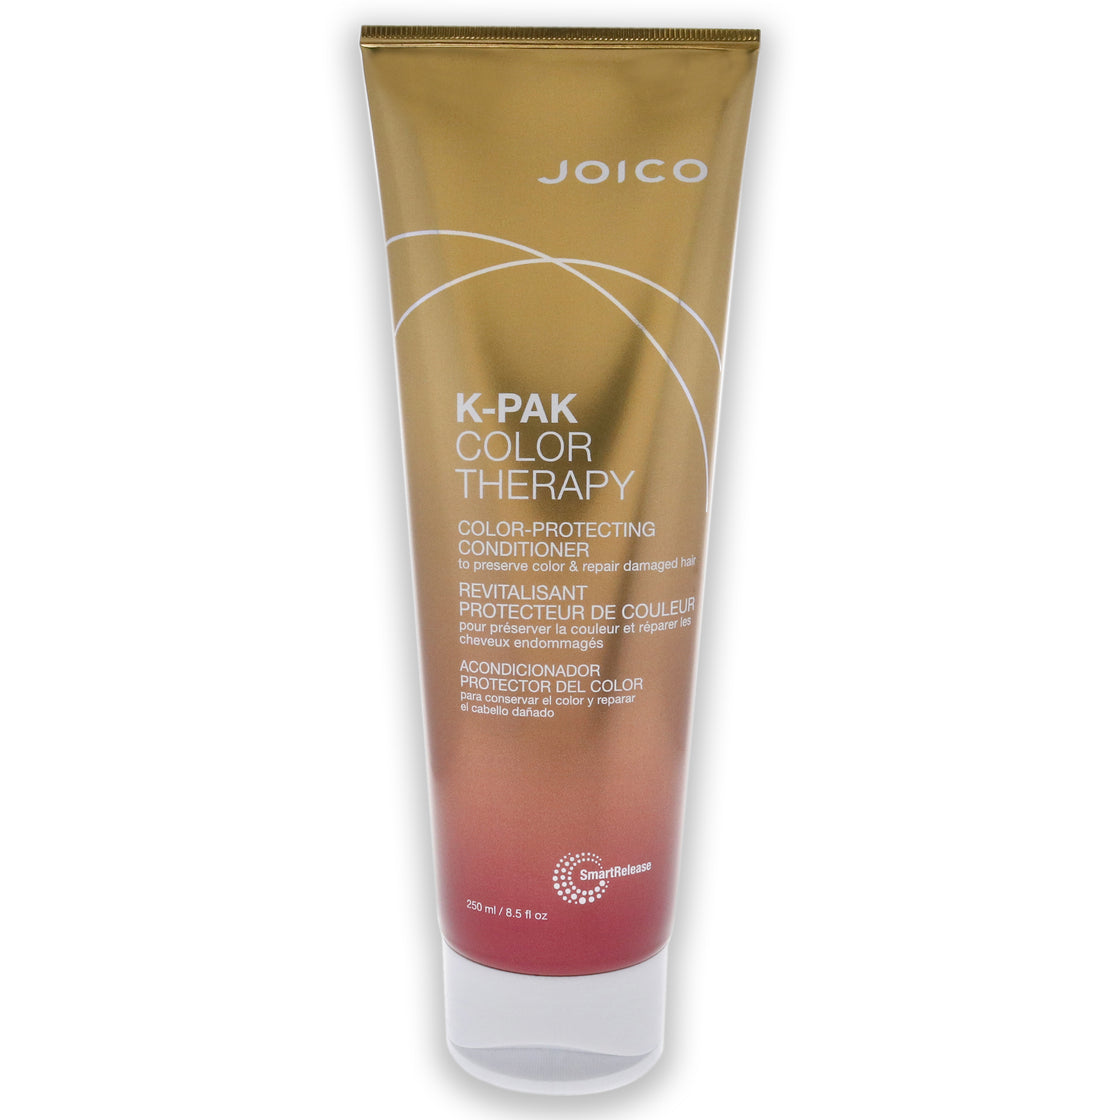 K-Pak Color Therapy Conditioner by Joico for Unisex - 8.5 oz Conditioner